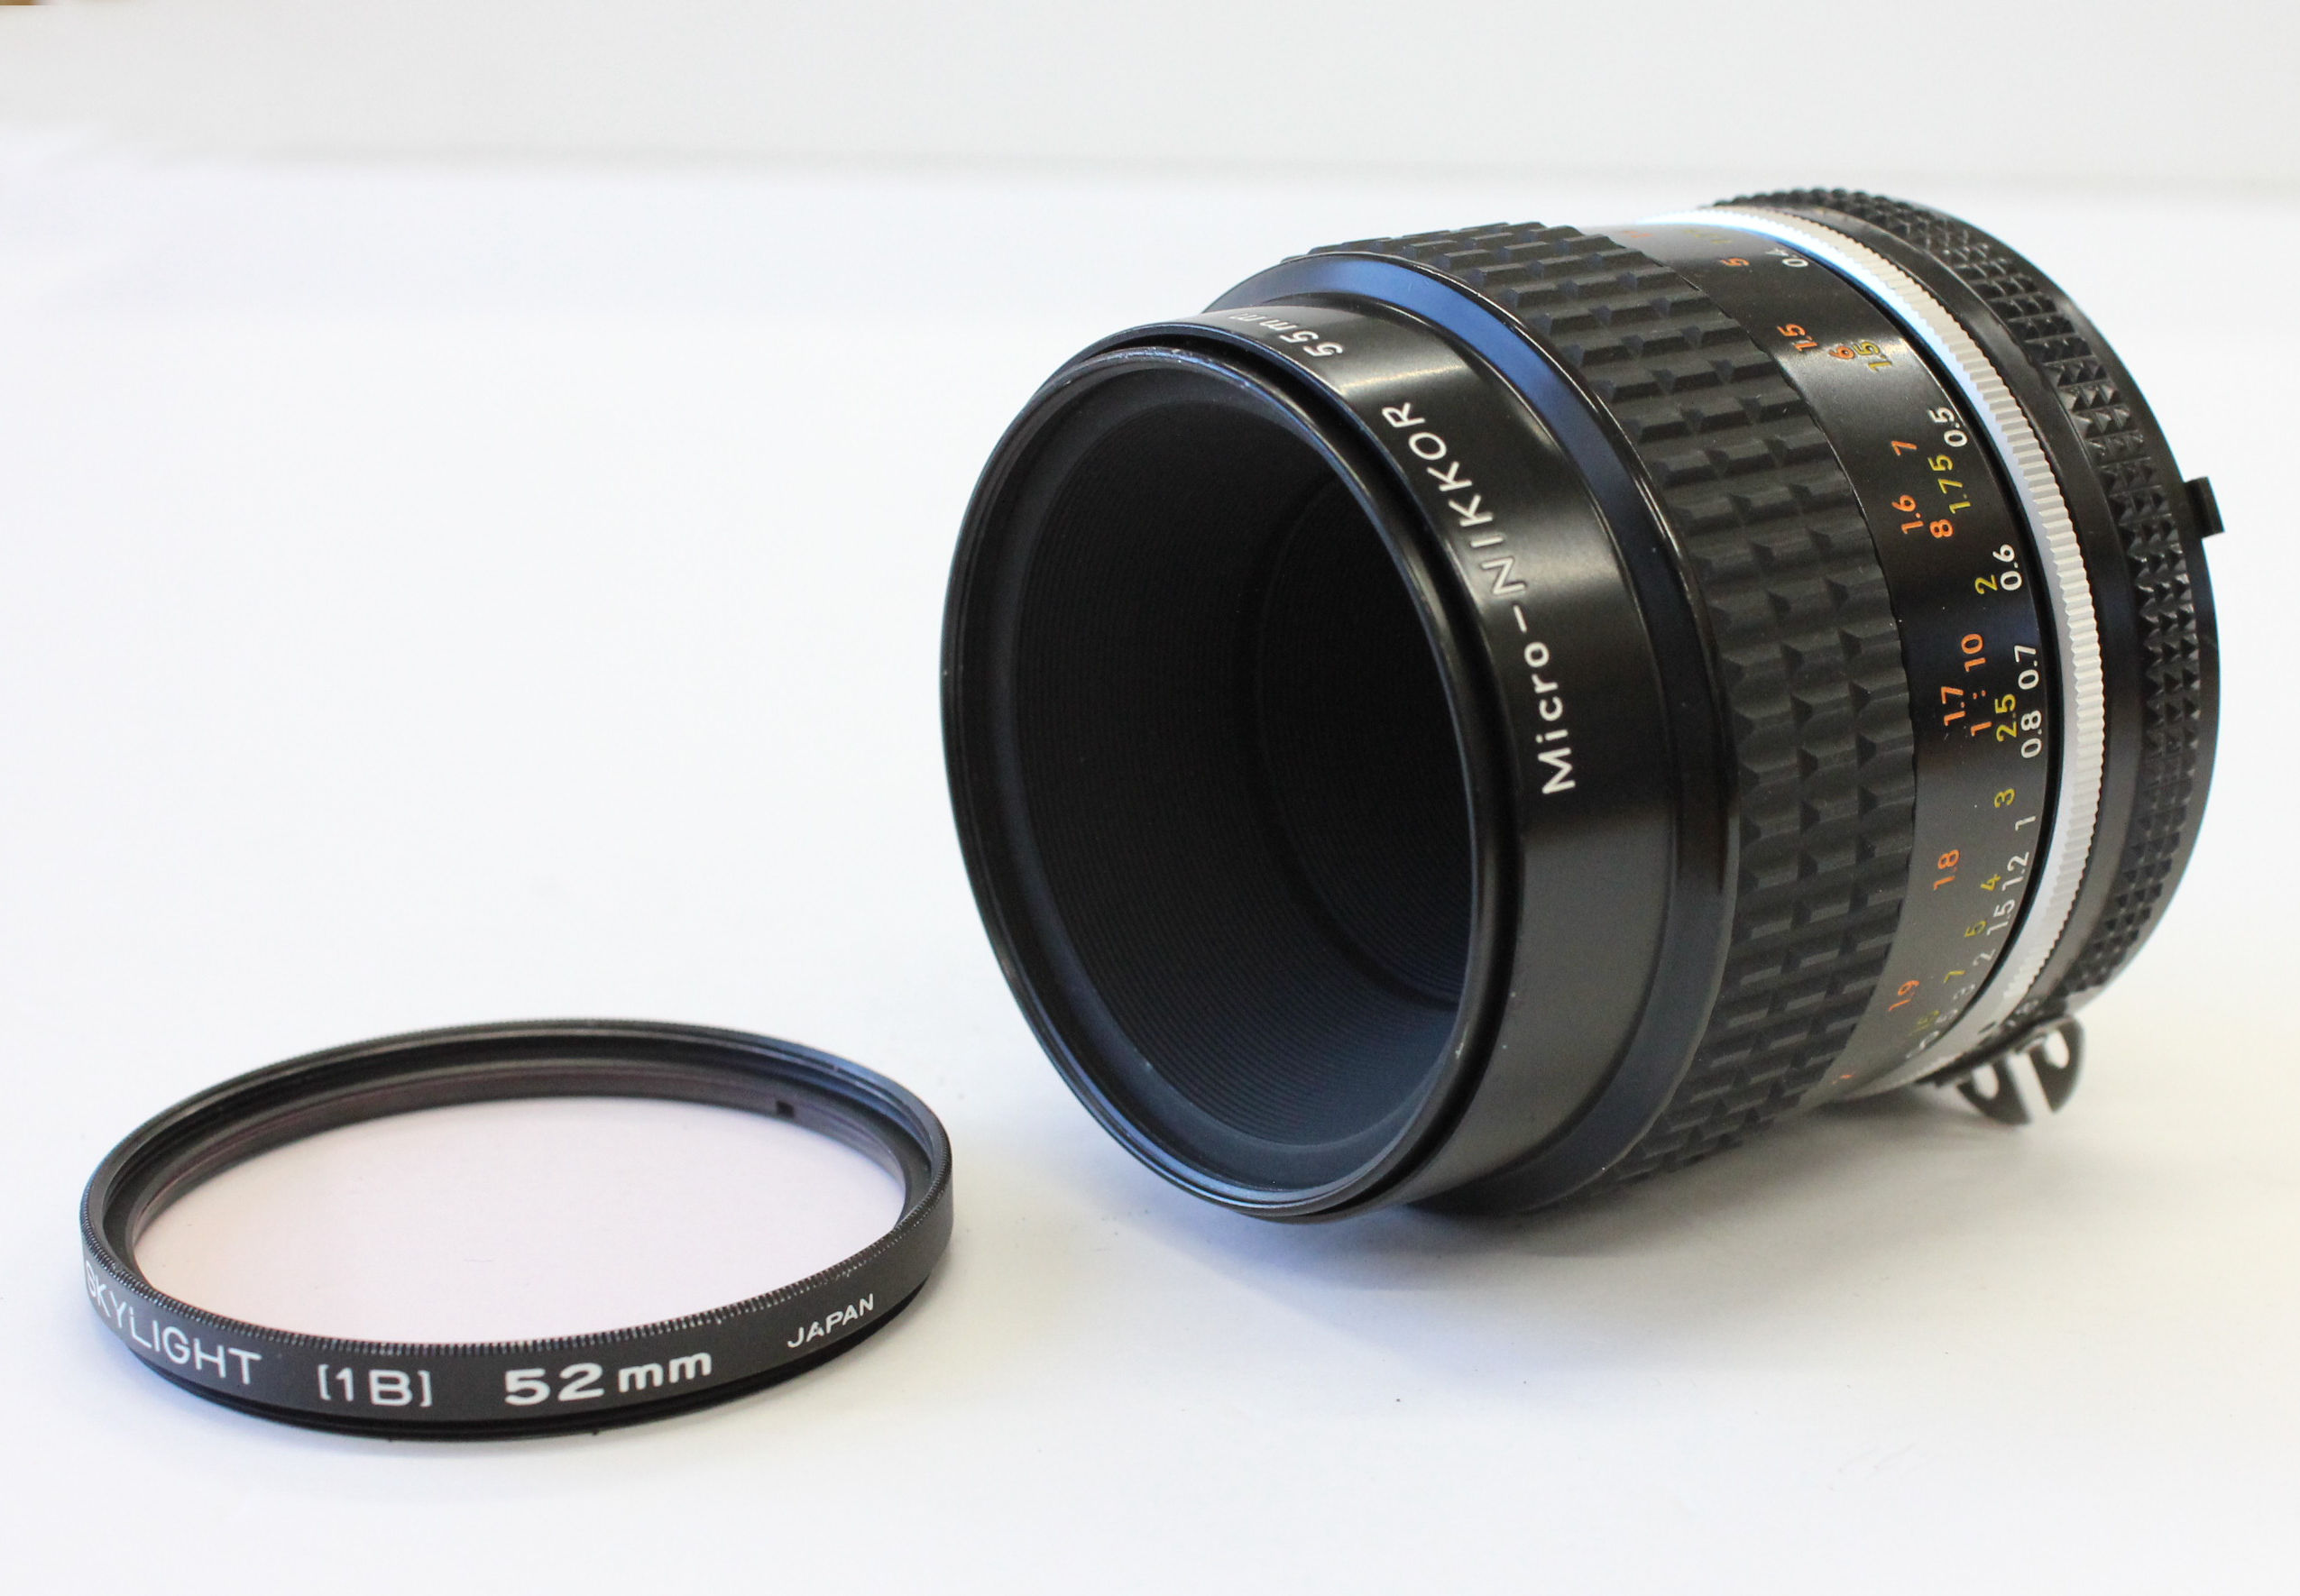 Japan Used Camera Shop | [Excellent++++] Nikon Ai-s Micro-NIKKOR 55mm F2.8 MF Lens from Japan